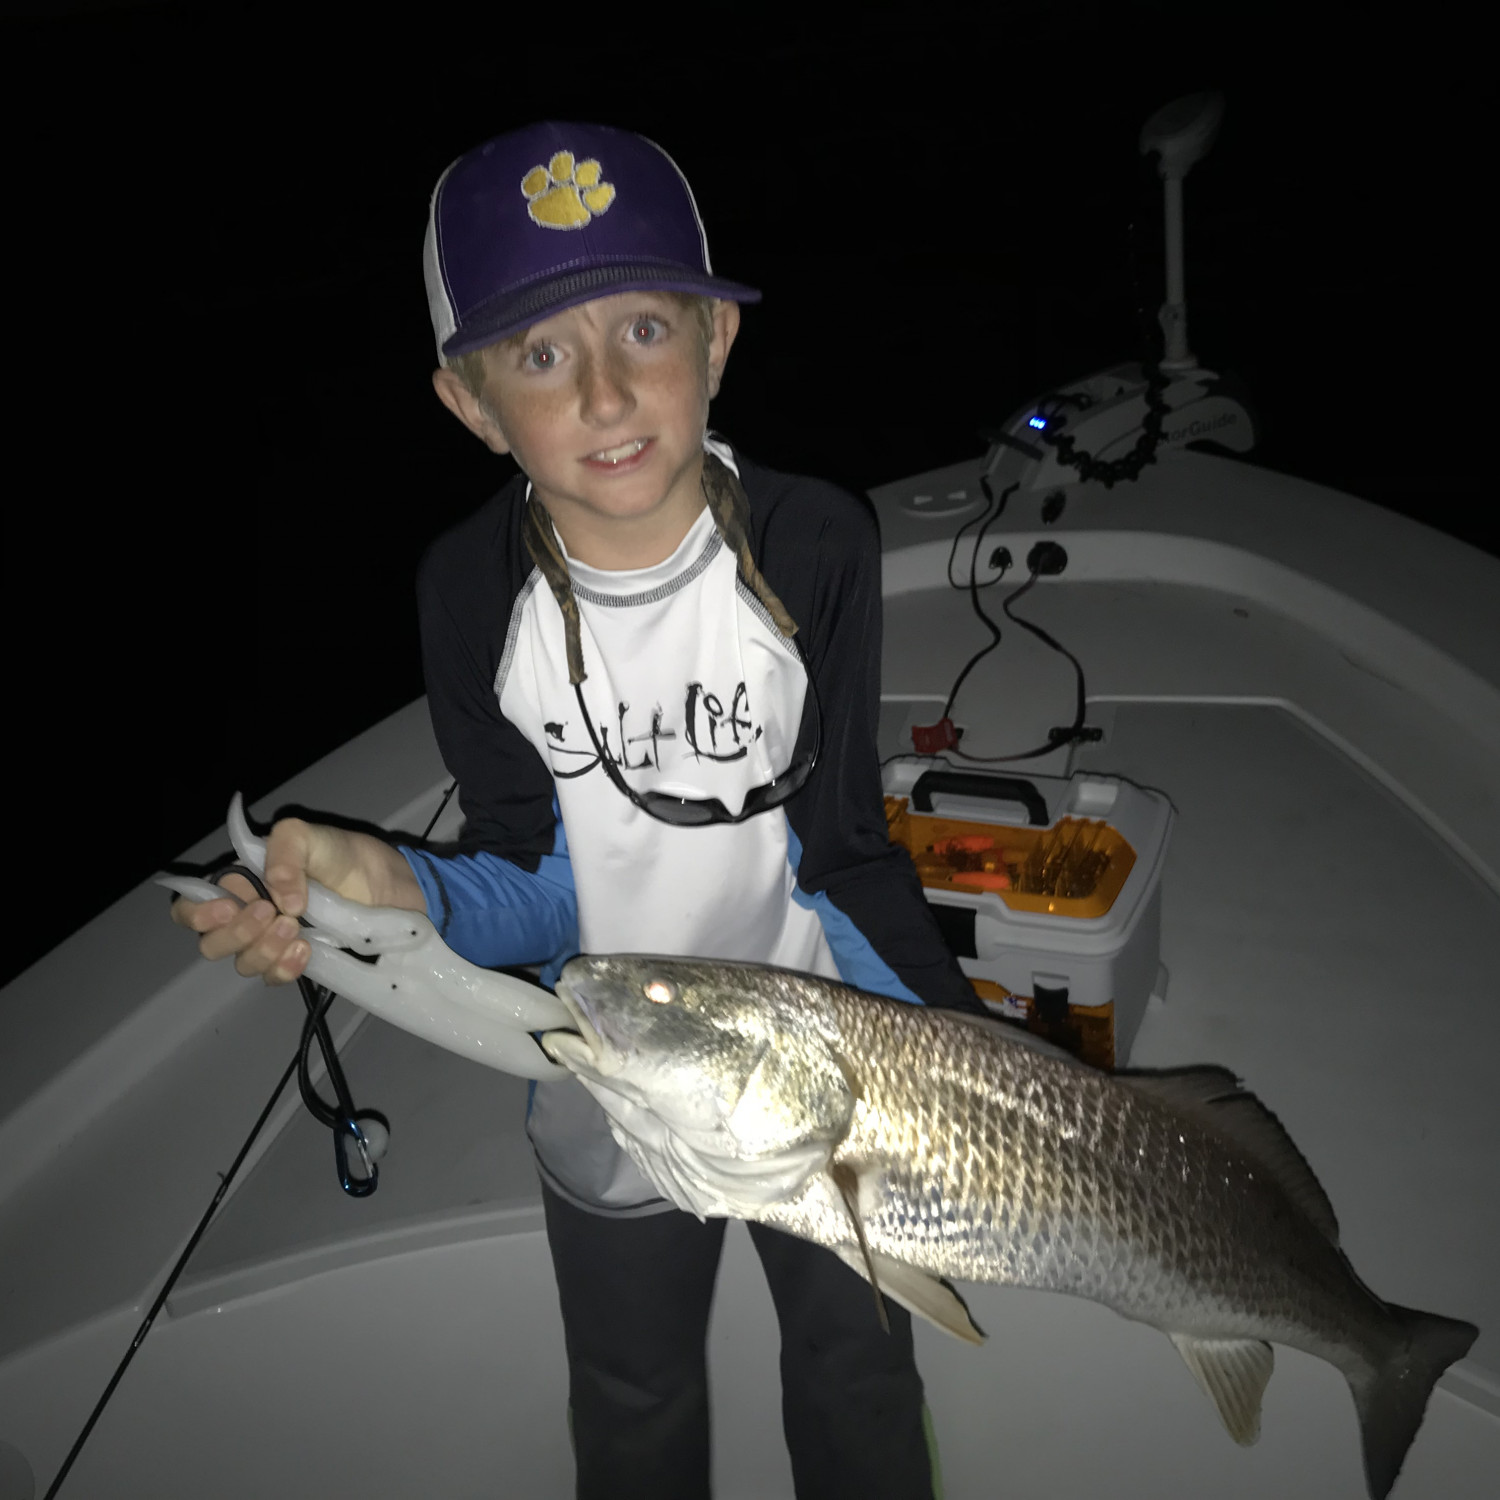 This is Justin’s first over slot redfish. He loves fishing very very much.